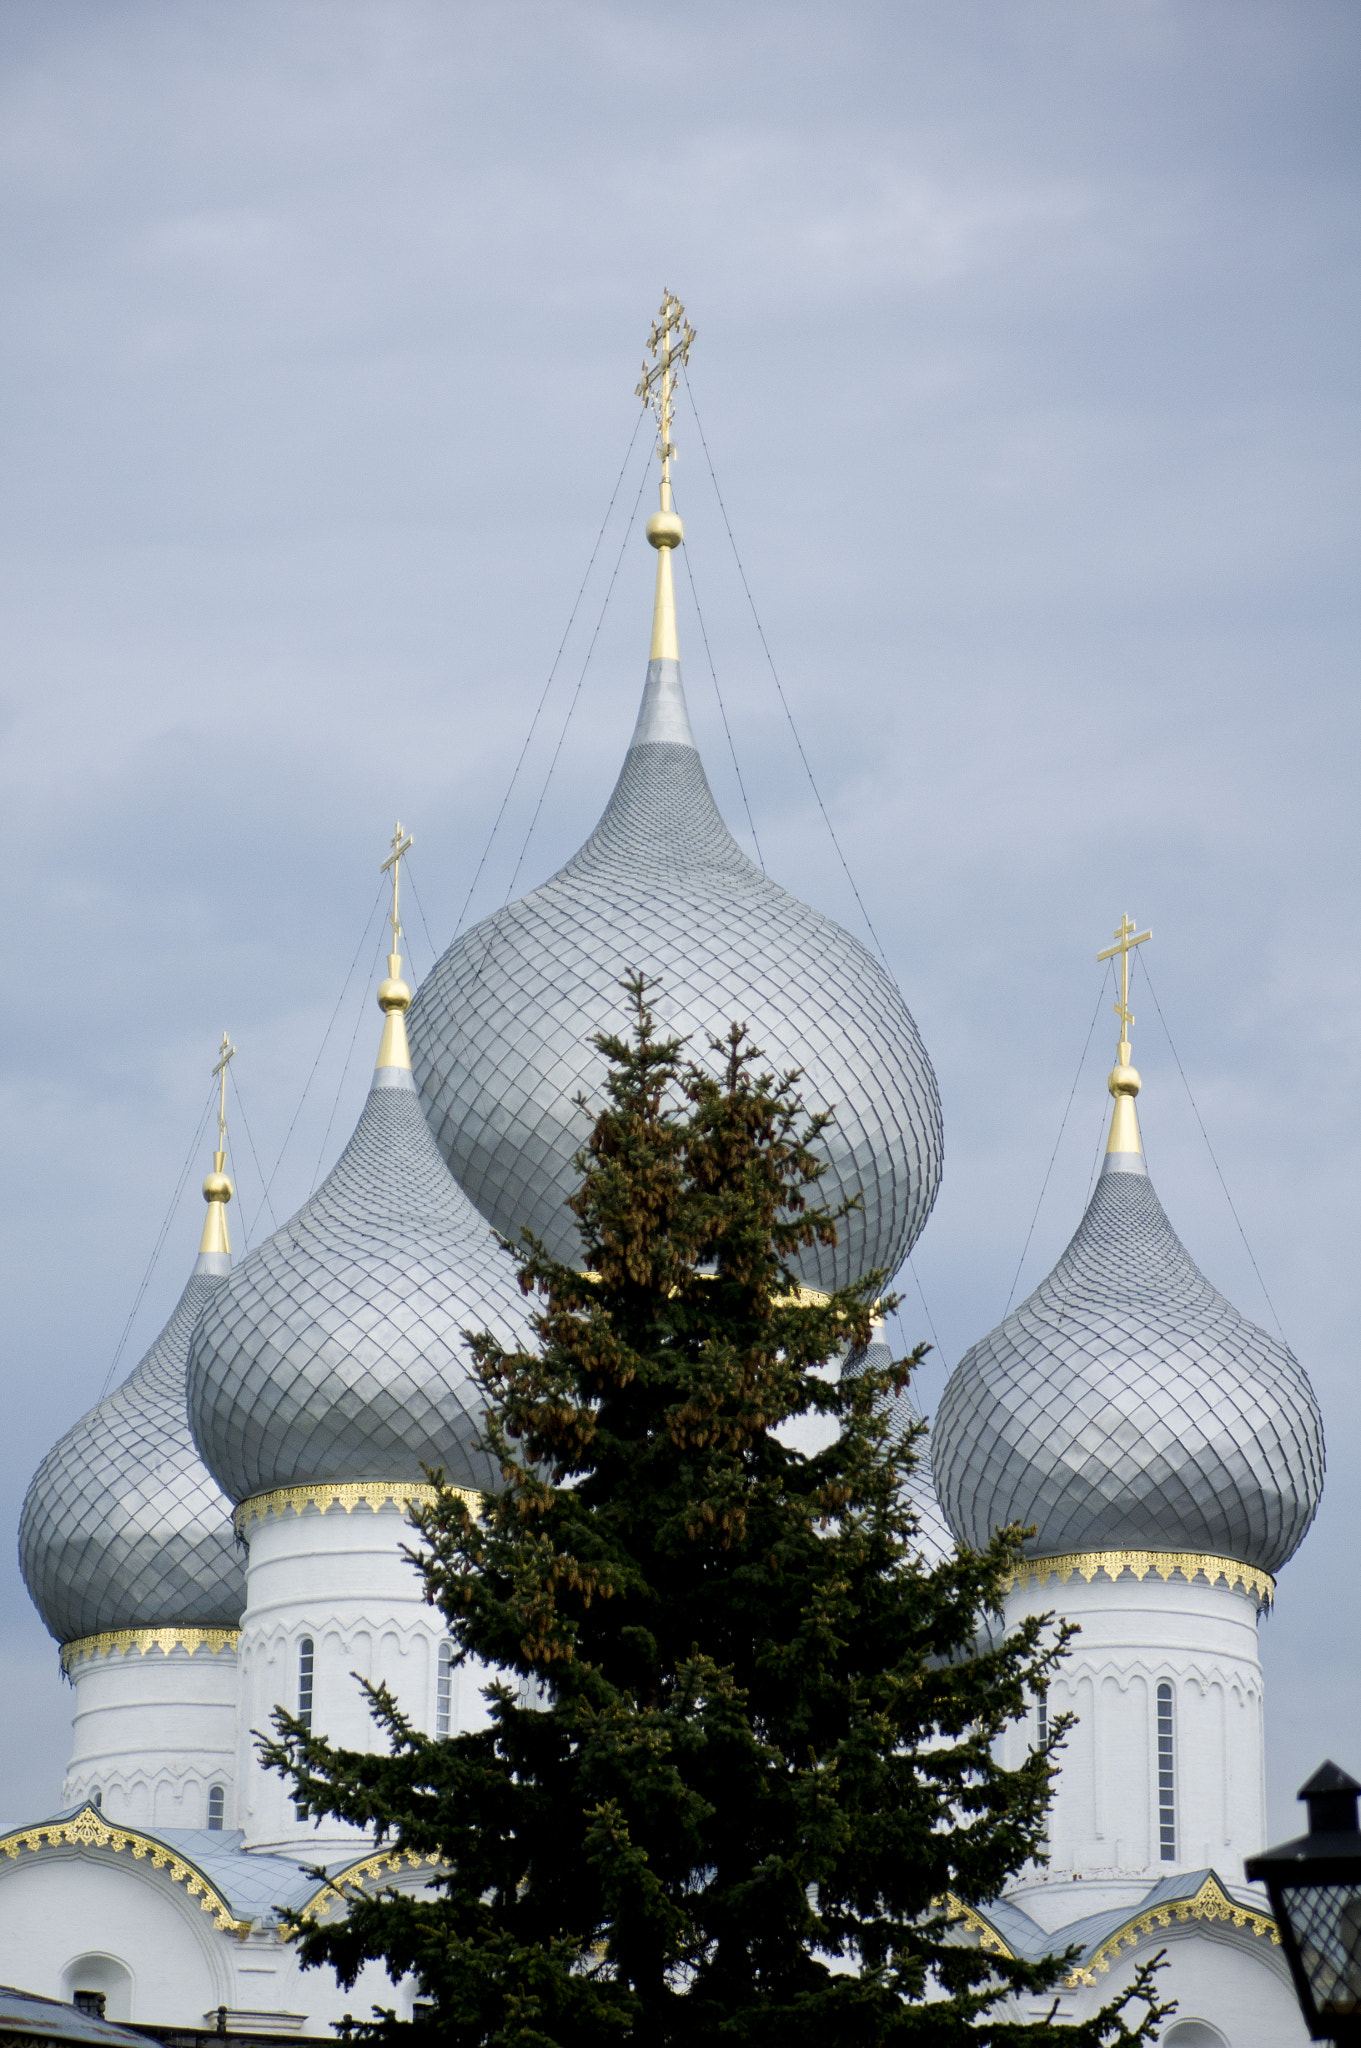 Sony Alpha DSLR-A580 sample photo. Travelling through the golden ring of russia photography